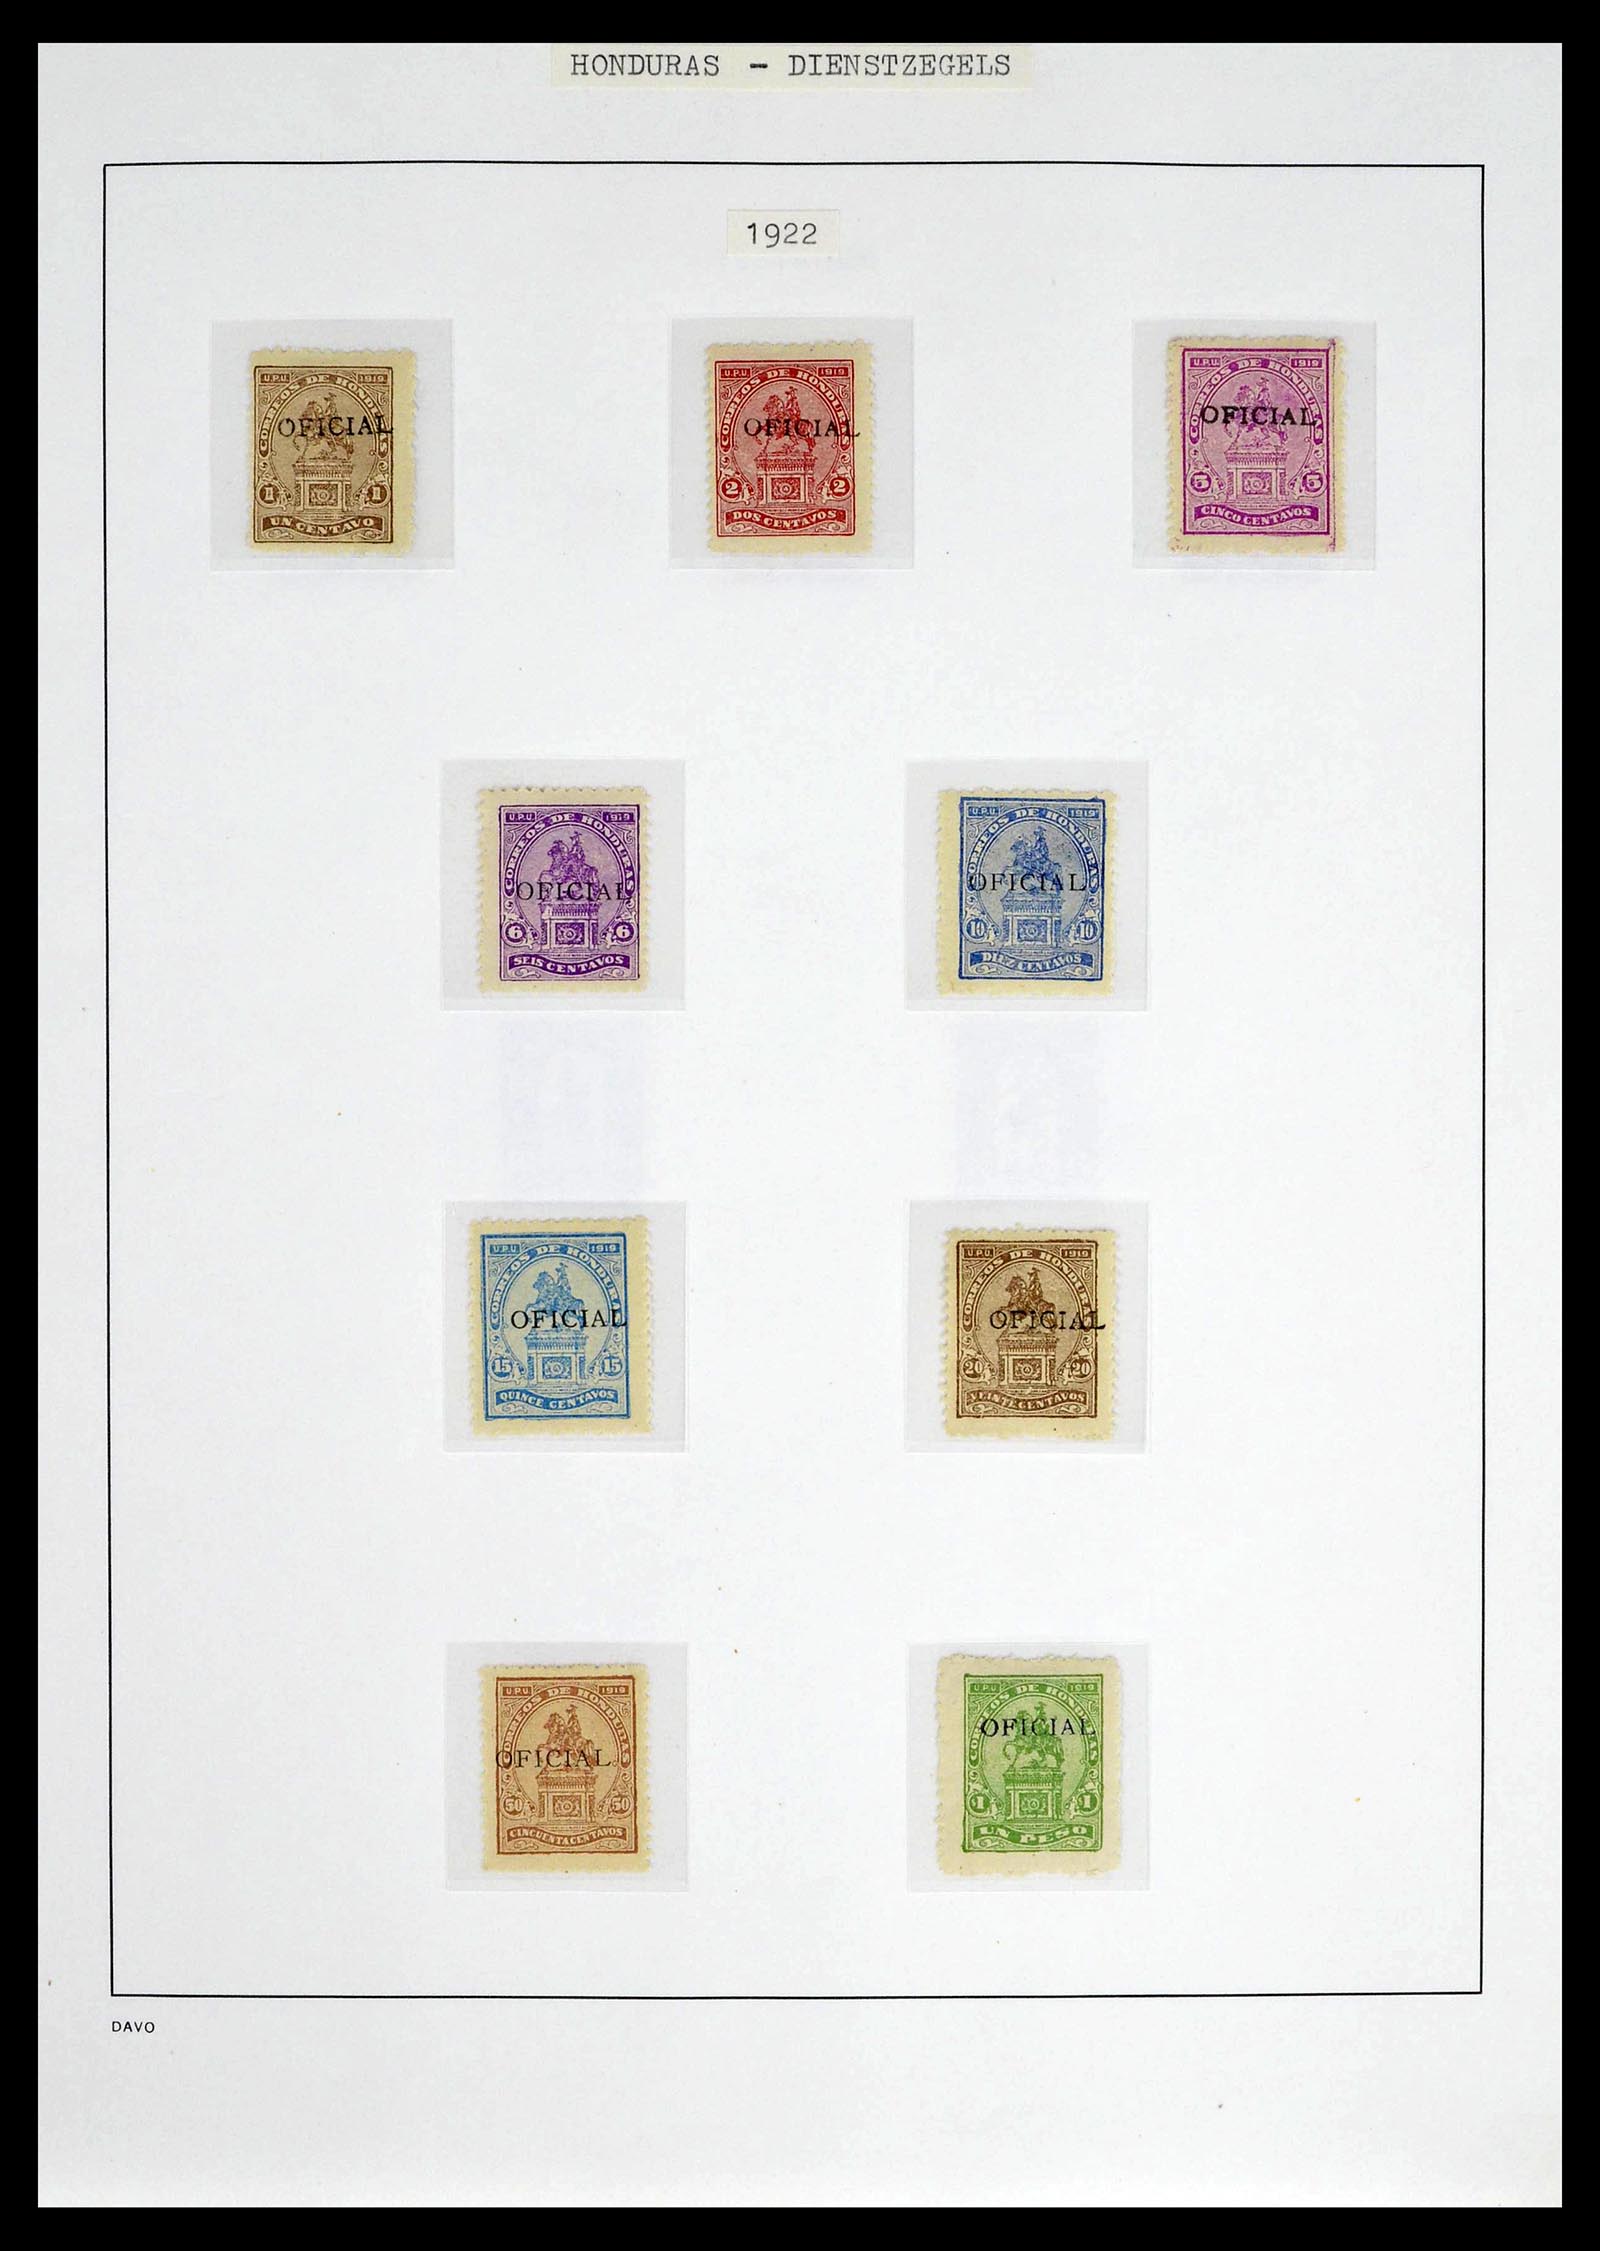 39404 0017 - Stamp collection 39404 Honduras service stamps 1890-1974.